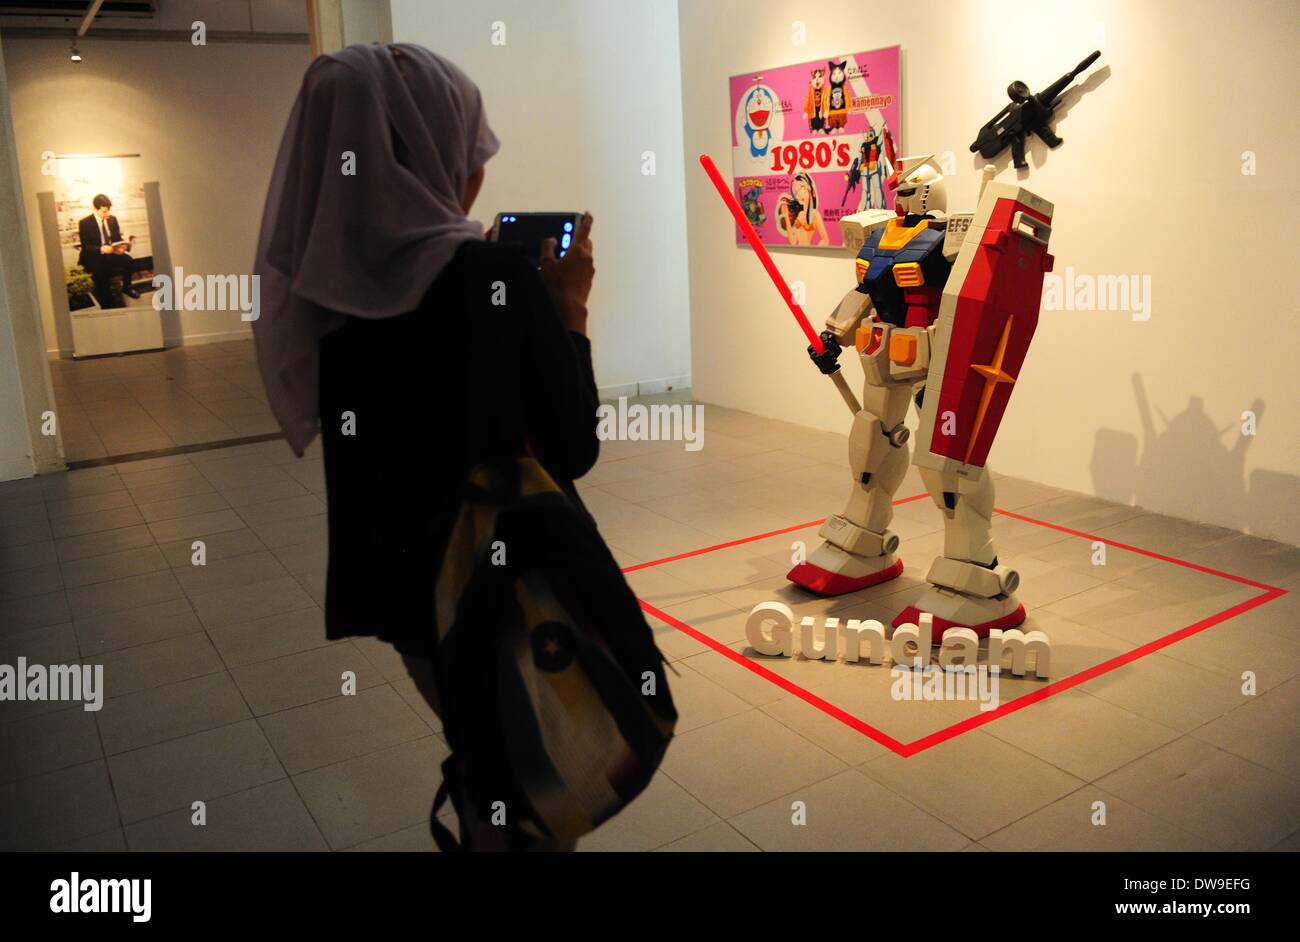 Jakarta, Indonesia. 4th Mar, 2014. A woman takes pictures of a cartoon character during the Japanese Pop Culture Characters Exhibition in Jakarta, Indonesia, March 4, 2014. The exhibition is held from March 4 to March 23. © Zulkarnain/Xinhua/Alamy Live News Stock Photo